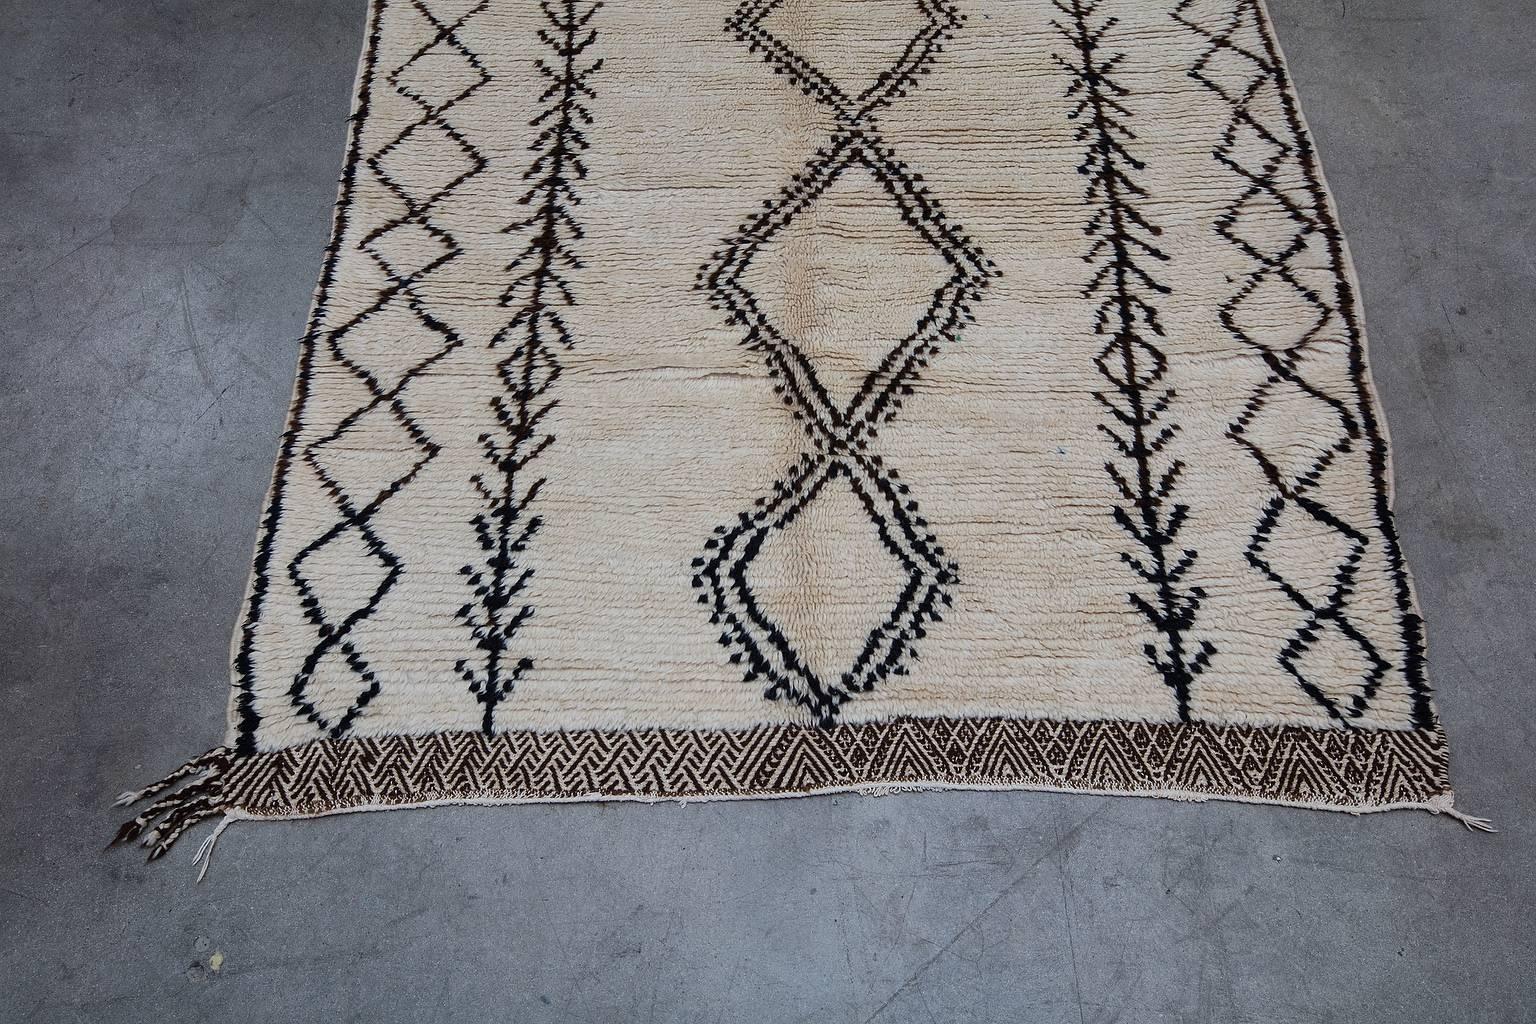 This rug hails from the Aït Bouguemez tribe in the Atlas Mountain region of Azilal. The defining Aït Bouguemez trademark of this piece are the flat woven bands at either end of the carpet. Azilal rugs are known for their artistic, abstract and